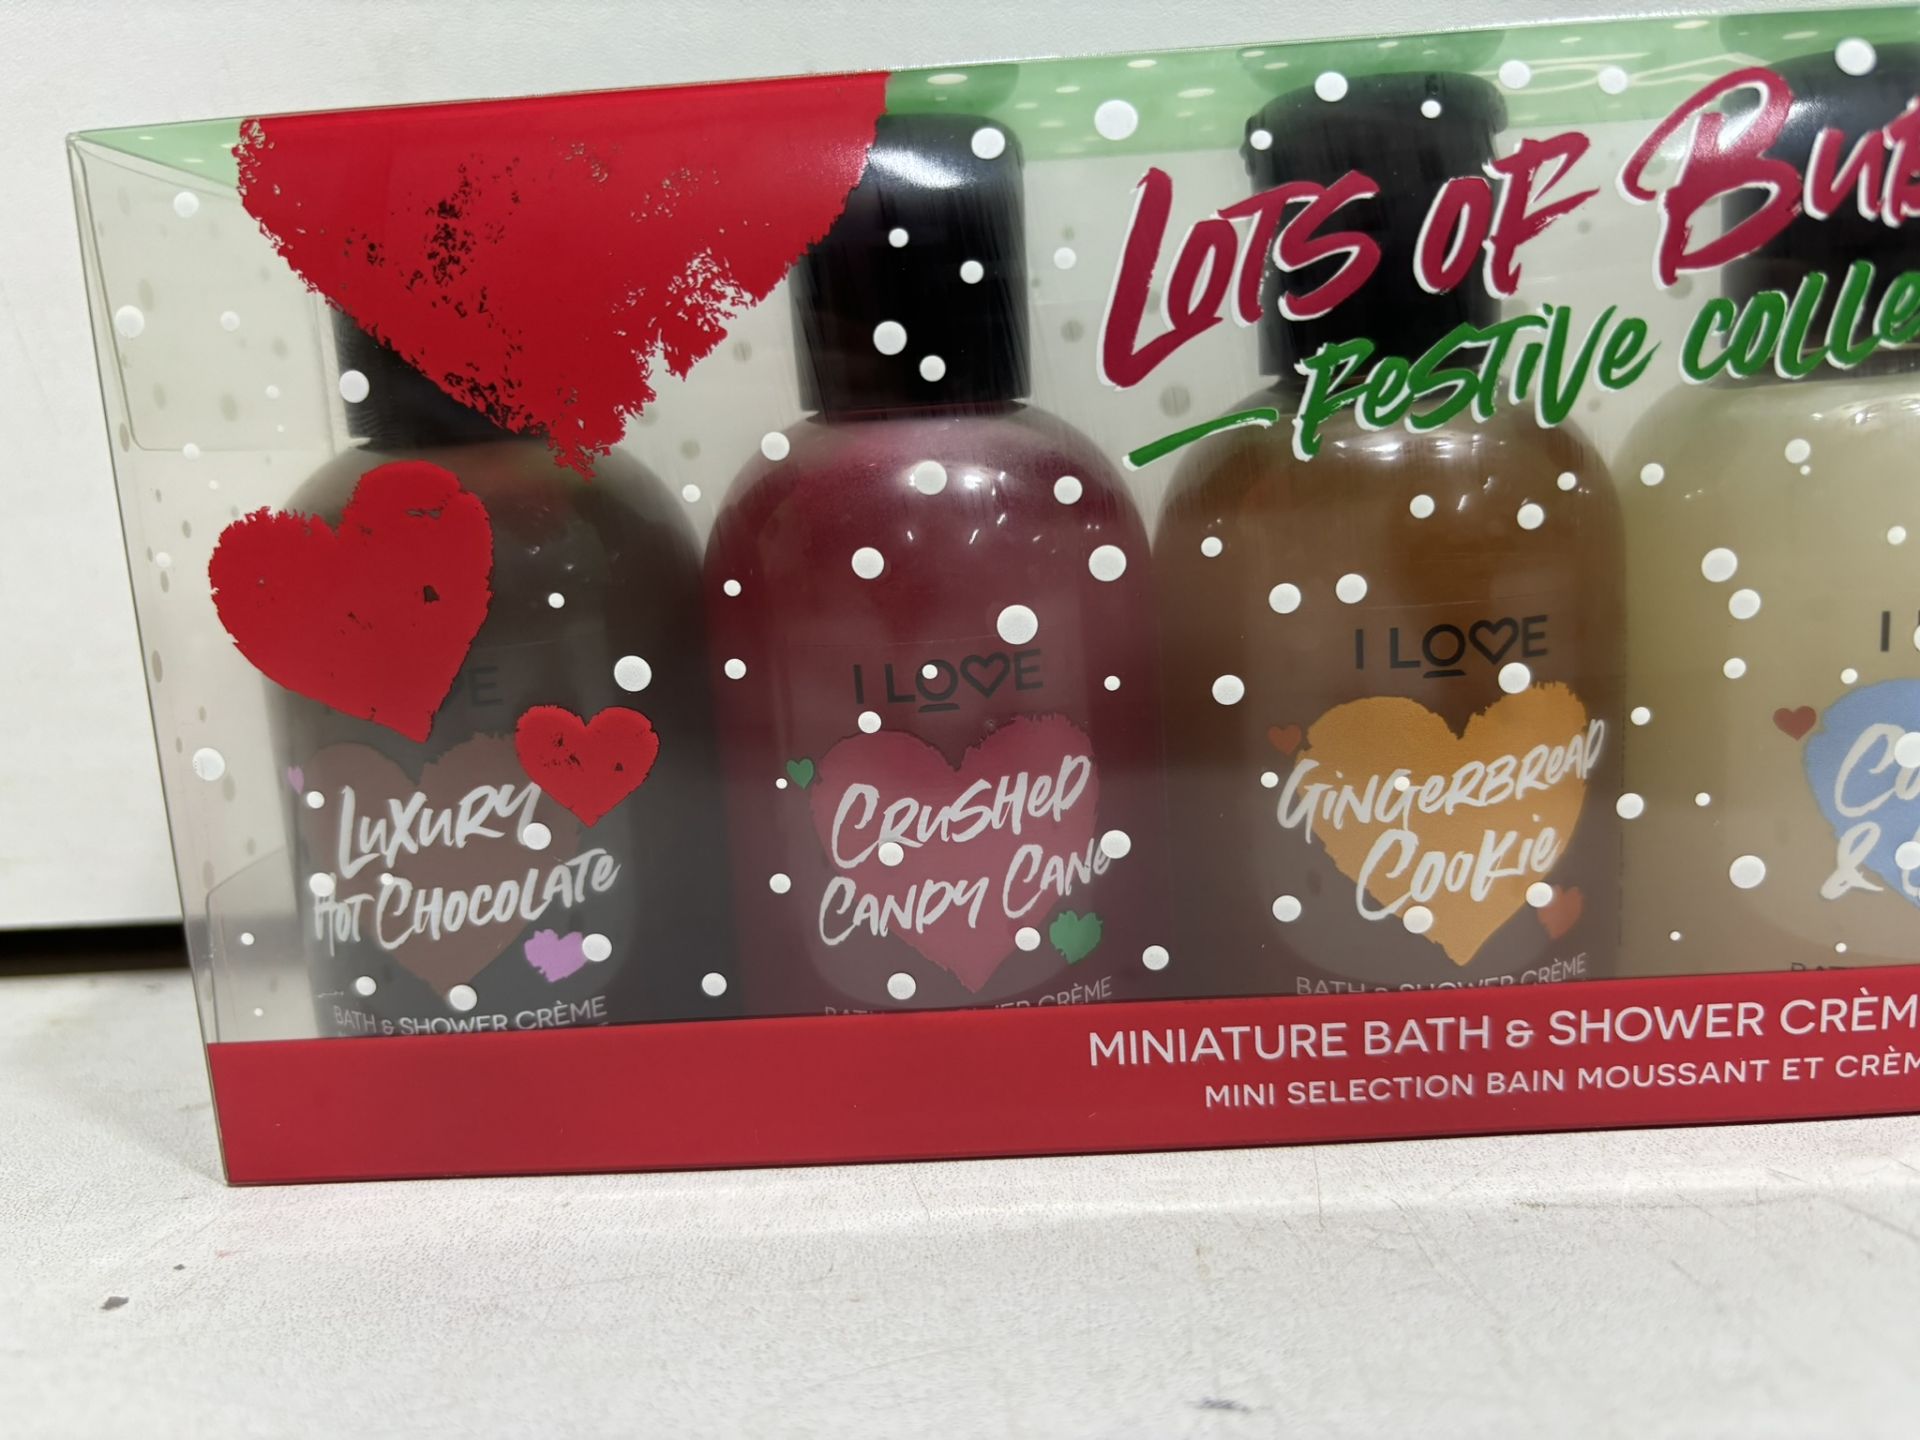 12 x I Love Cosmetics Lots of Bubbles Bath & Shower Creme Festive Collection Gift Sets - Image 2 of 10